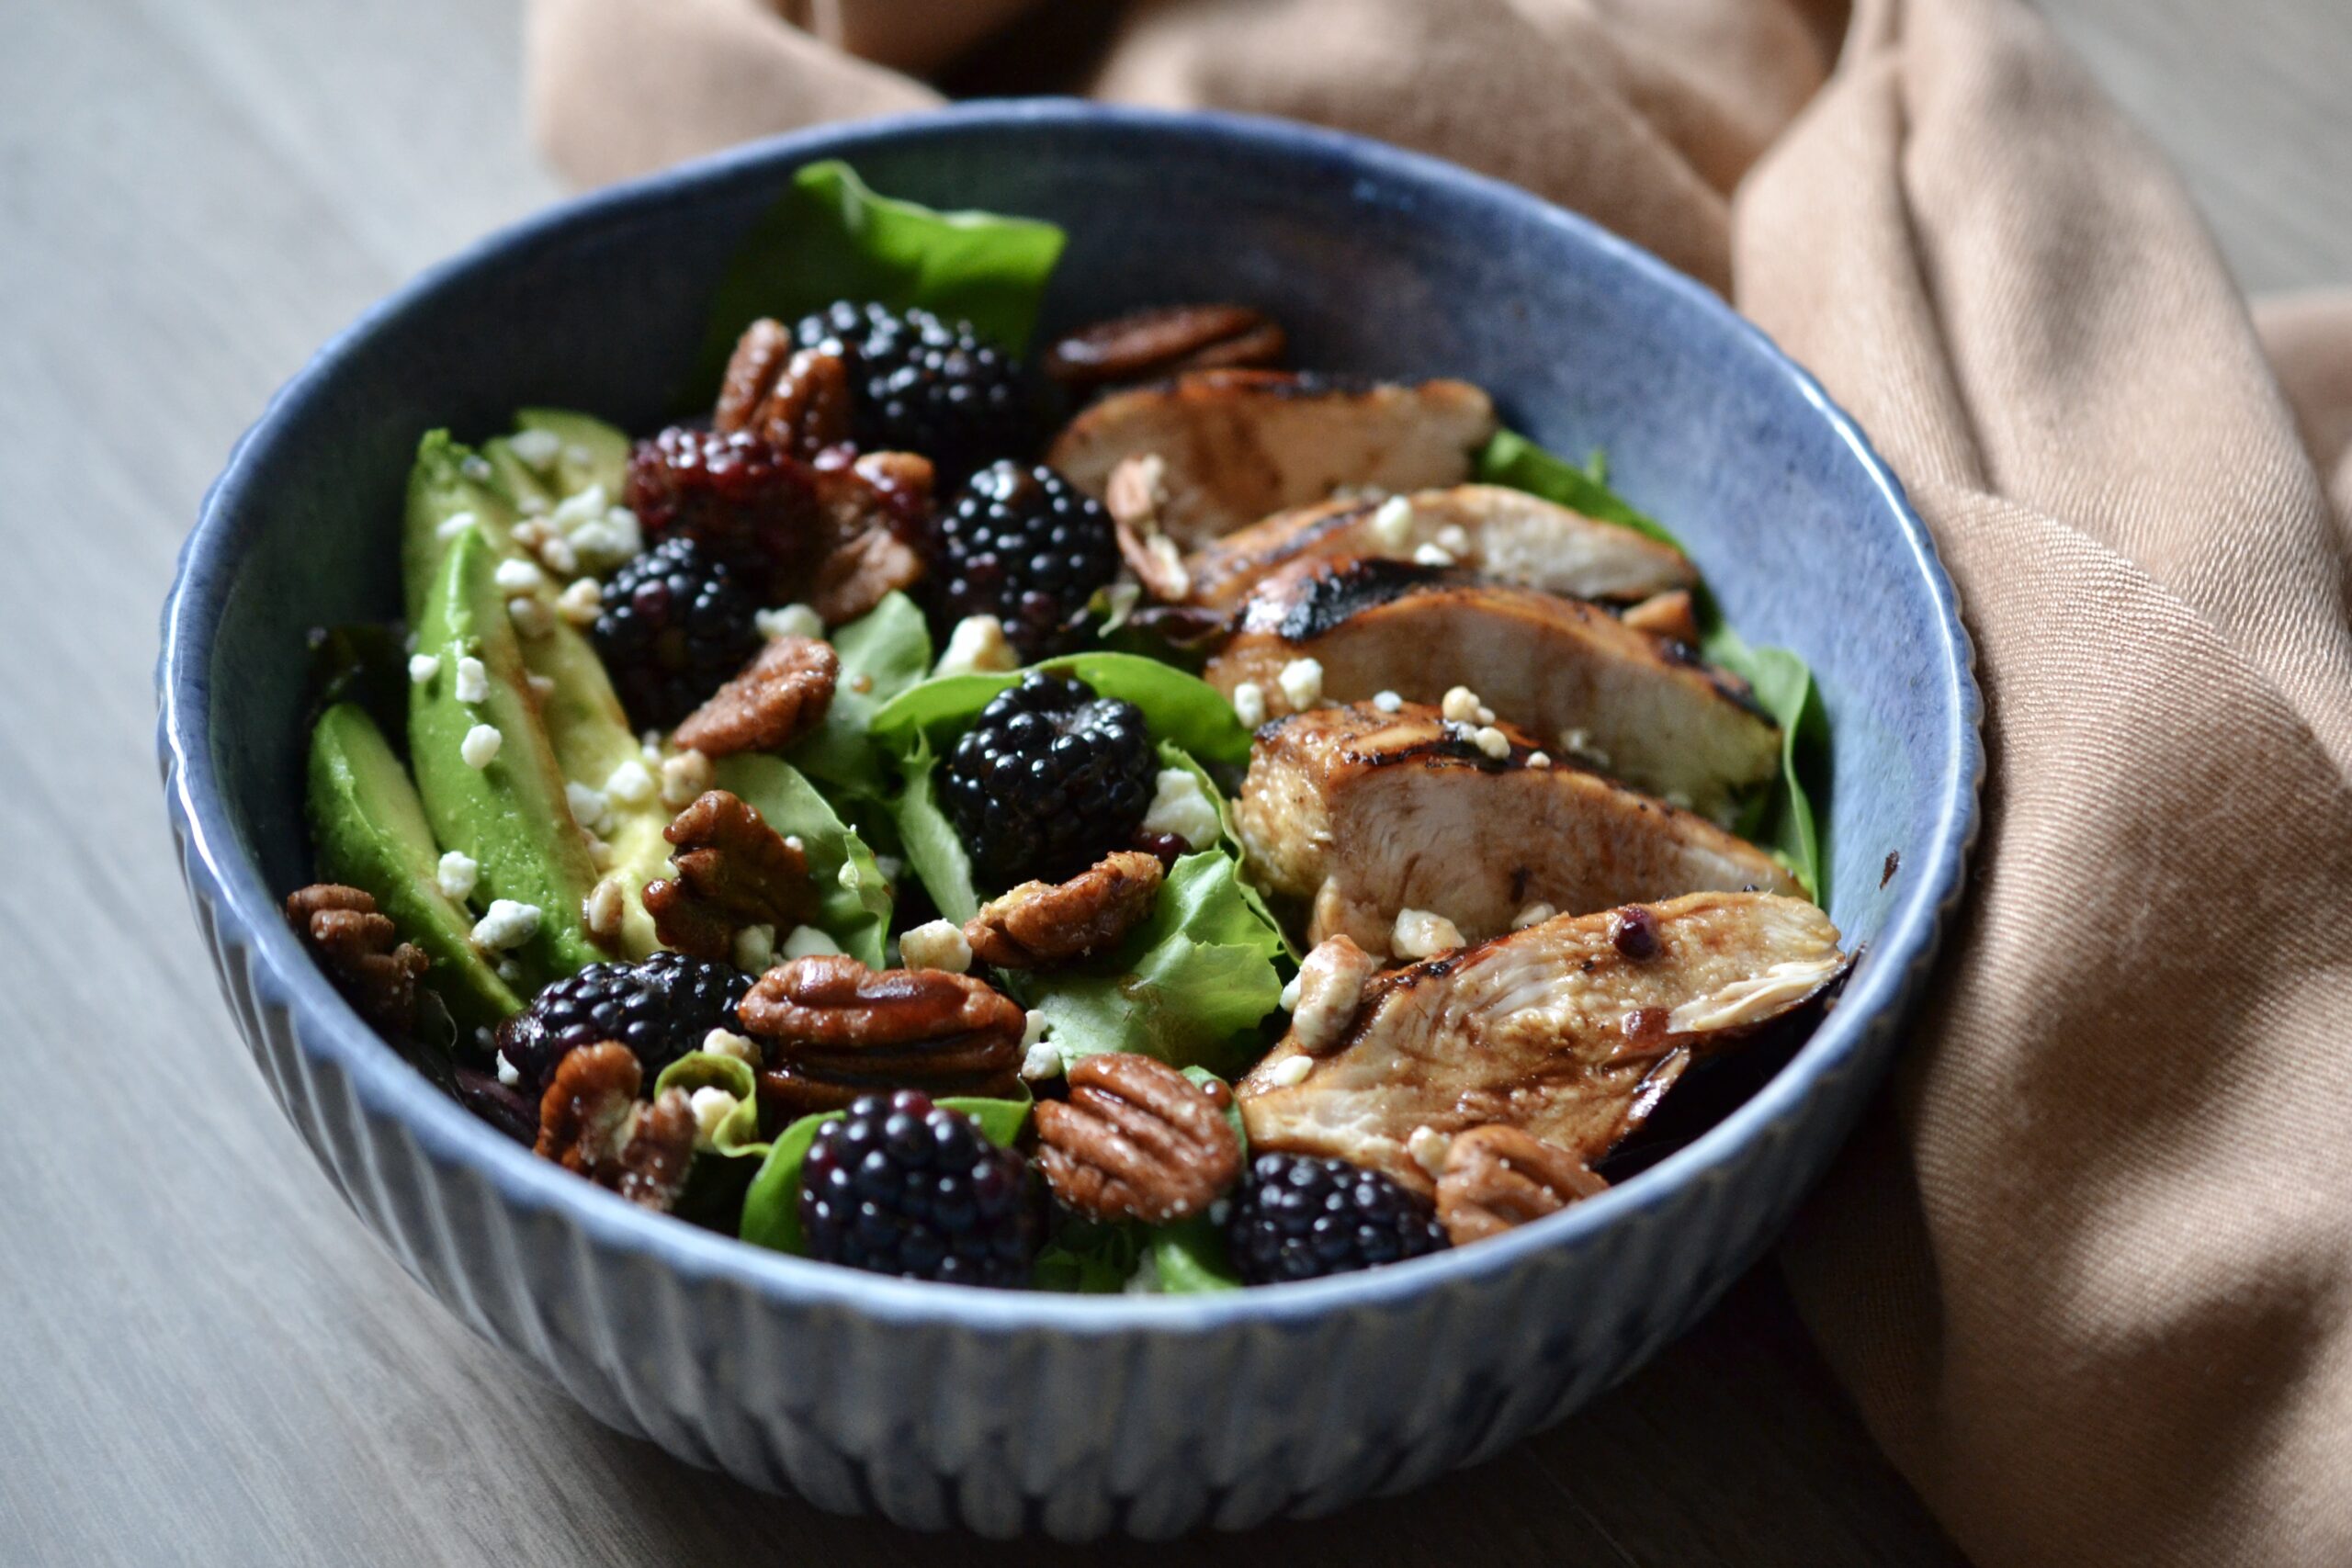 30-minute Salad with Grilled Chicken and Blackberry Balsamic Vinaigrette